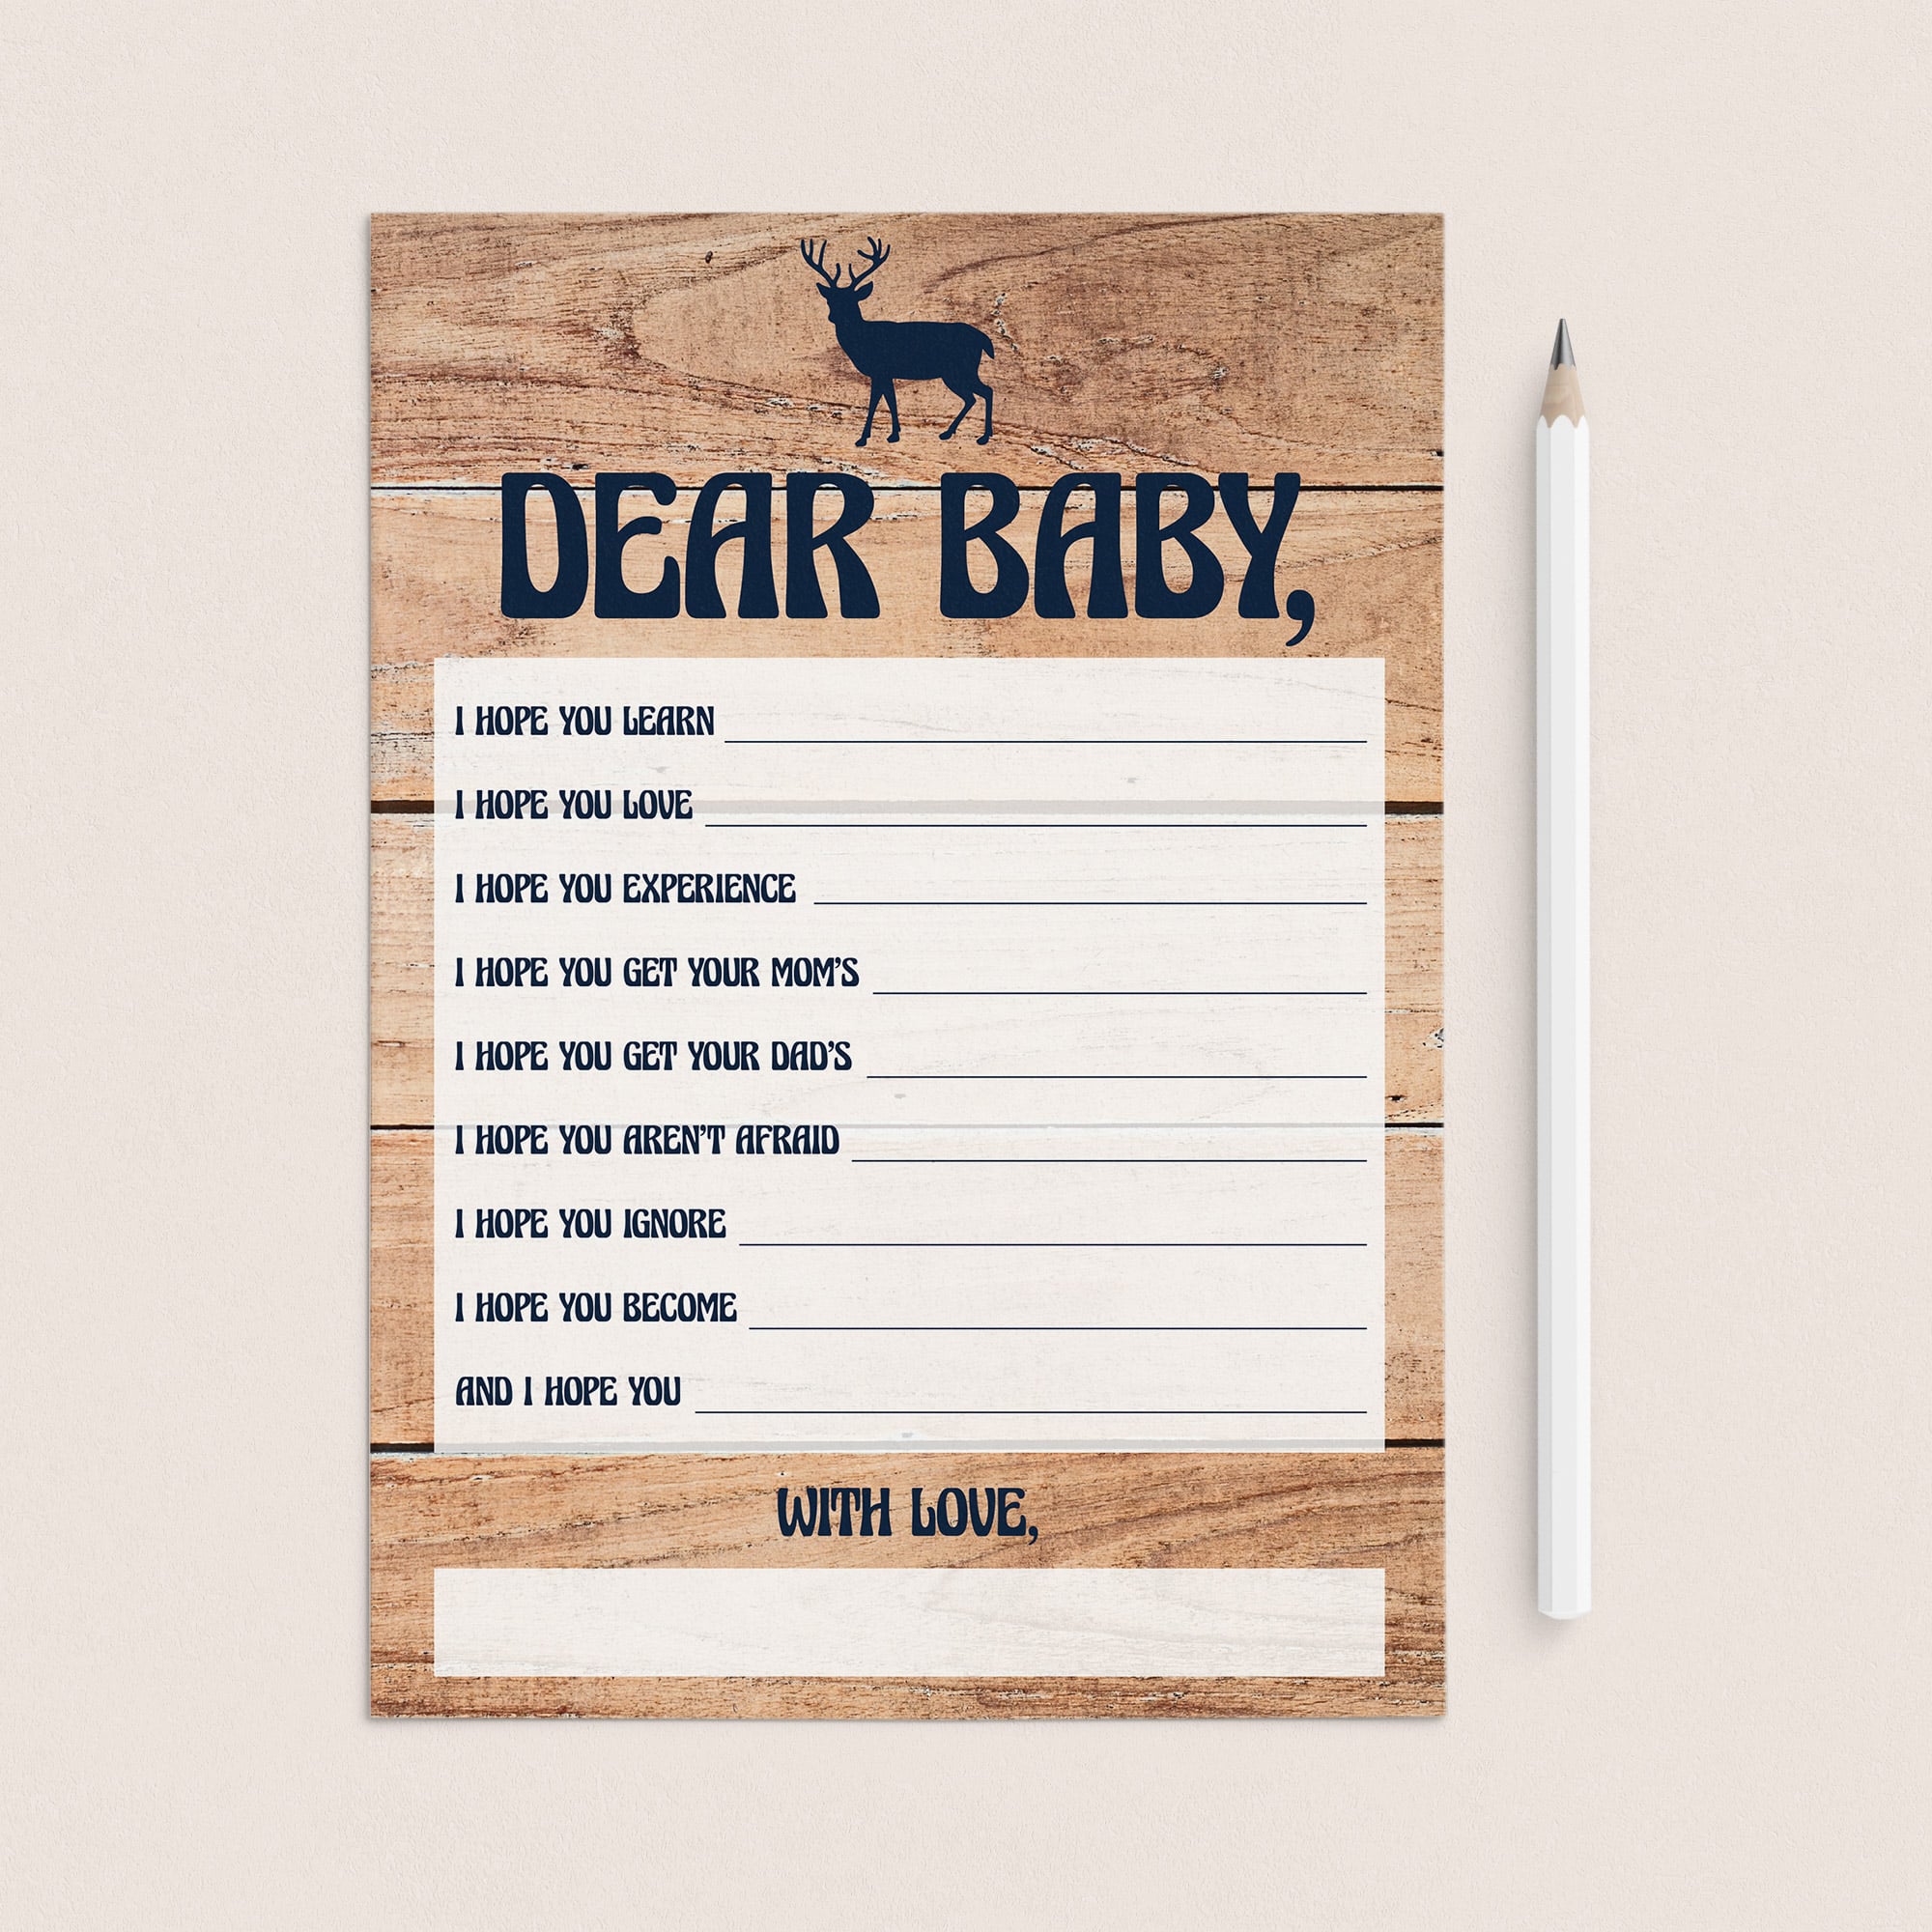 Dear baby shower game cards printable by LittleSizzle